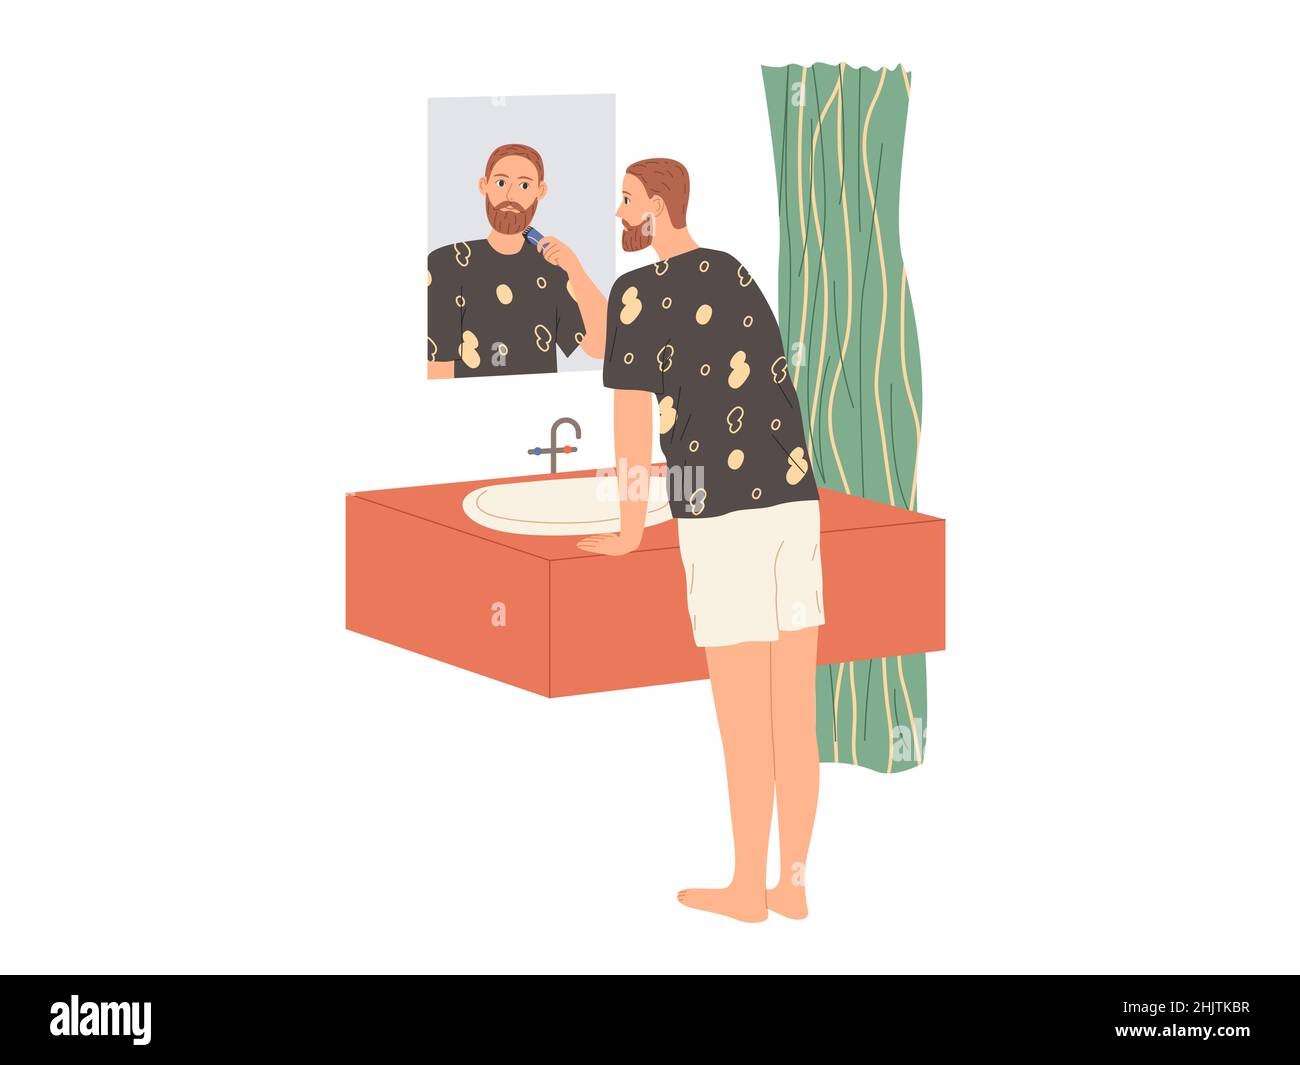 Man shaves his beard with an electric razor while standing in the bathtub by the mirror. Stock Vector